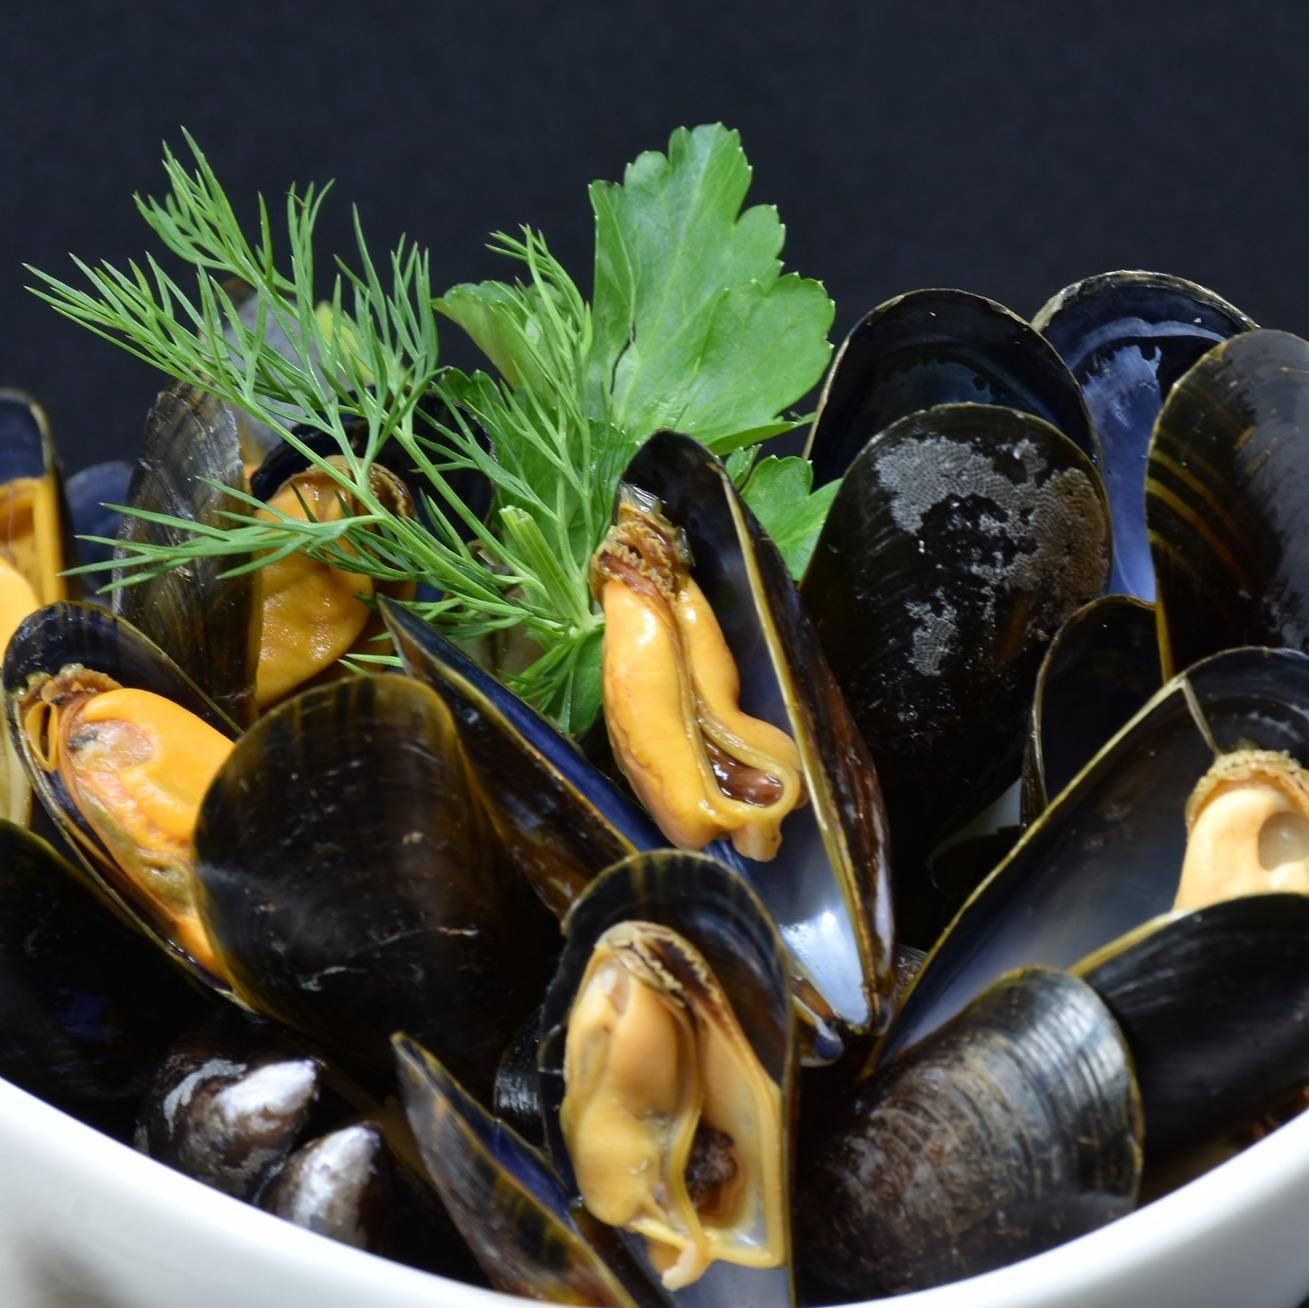 A bowl of mussels